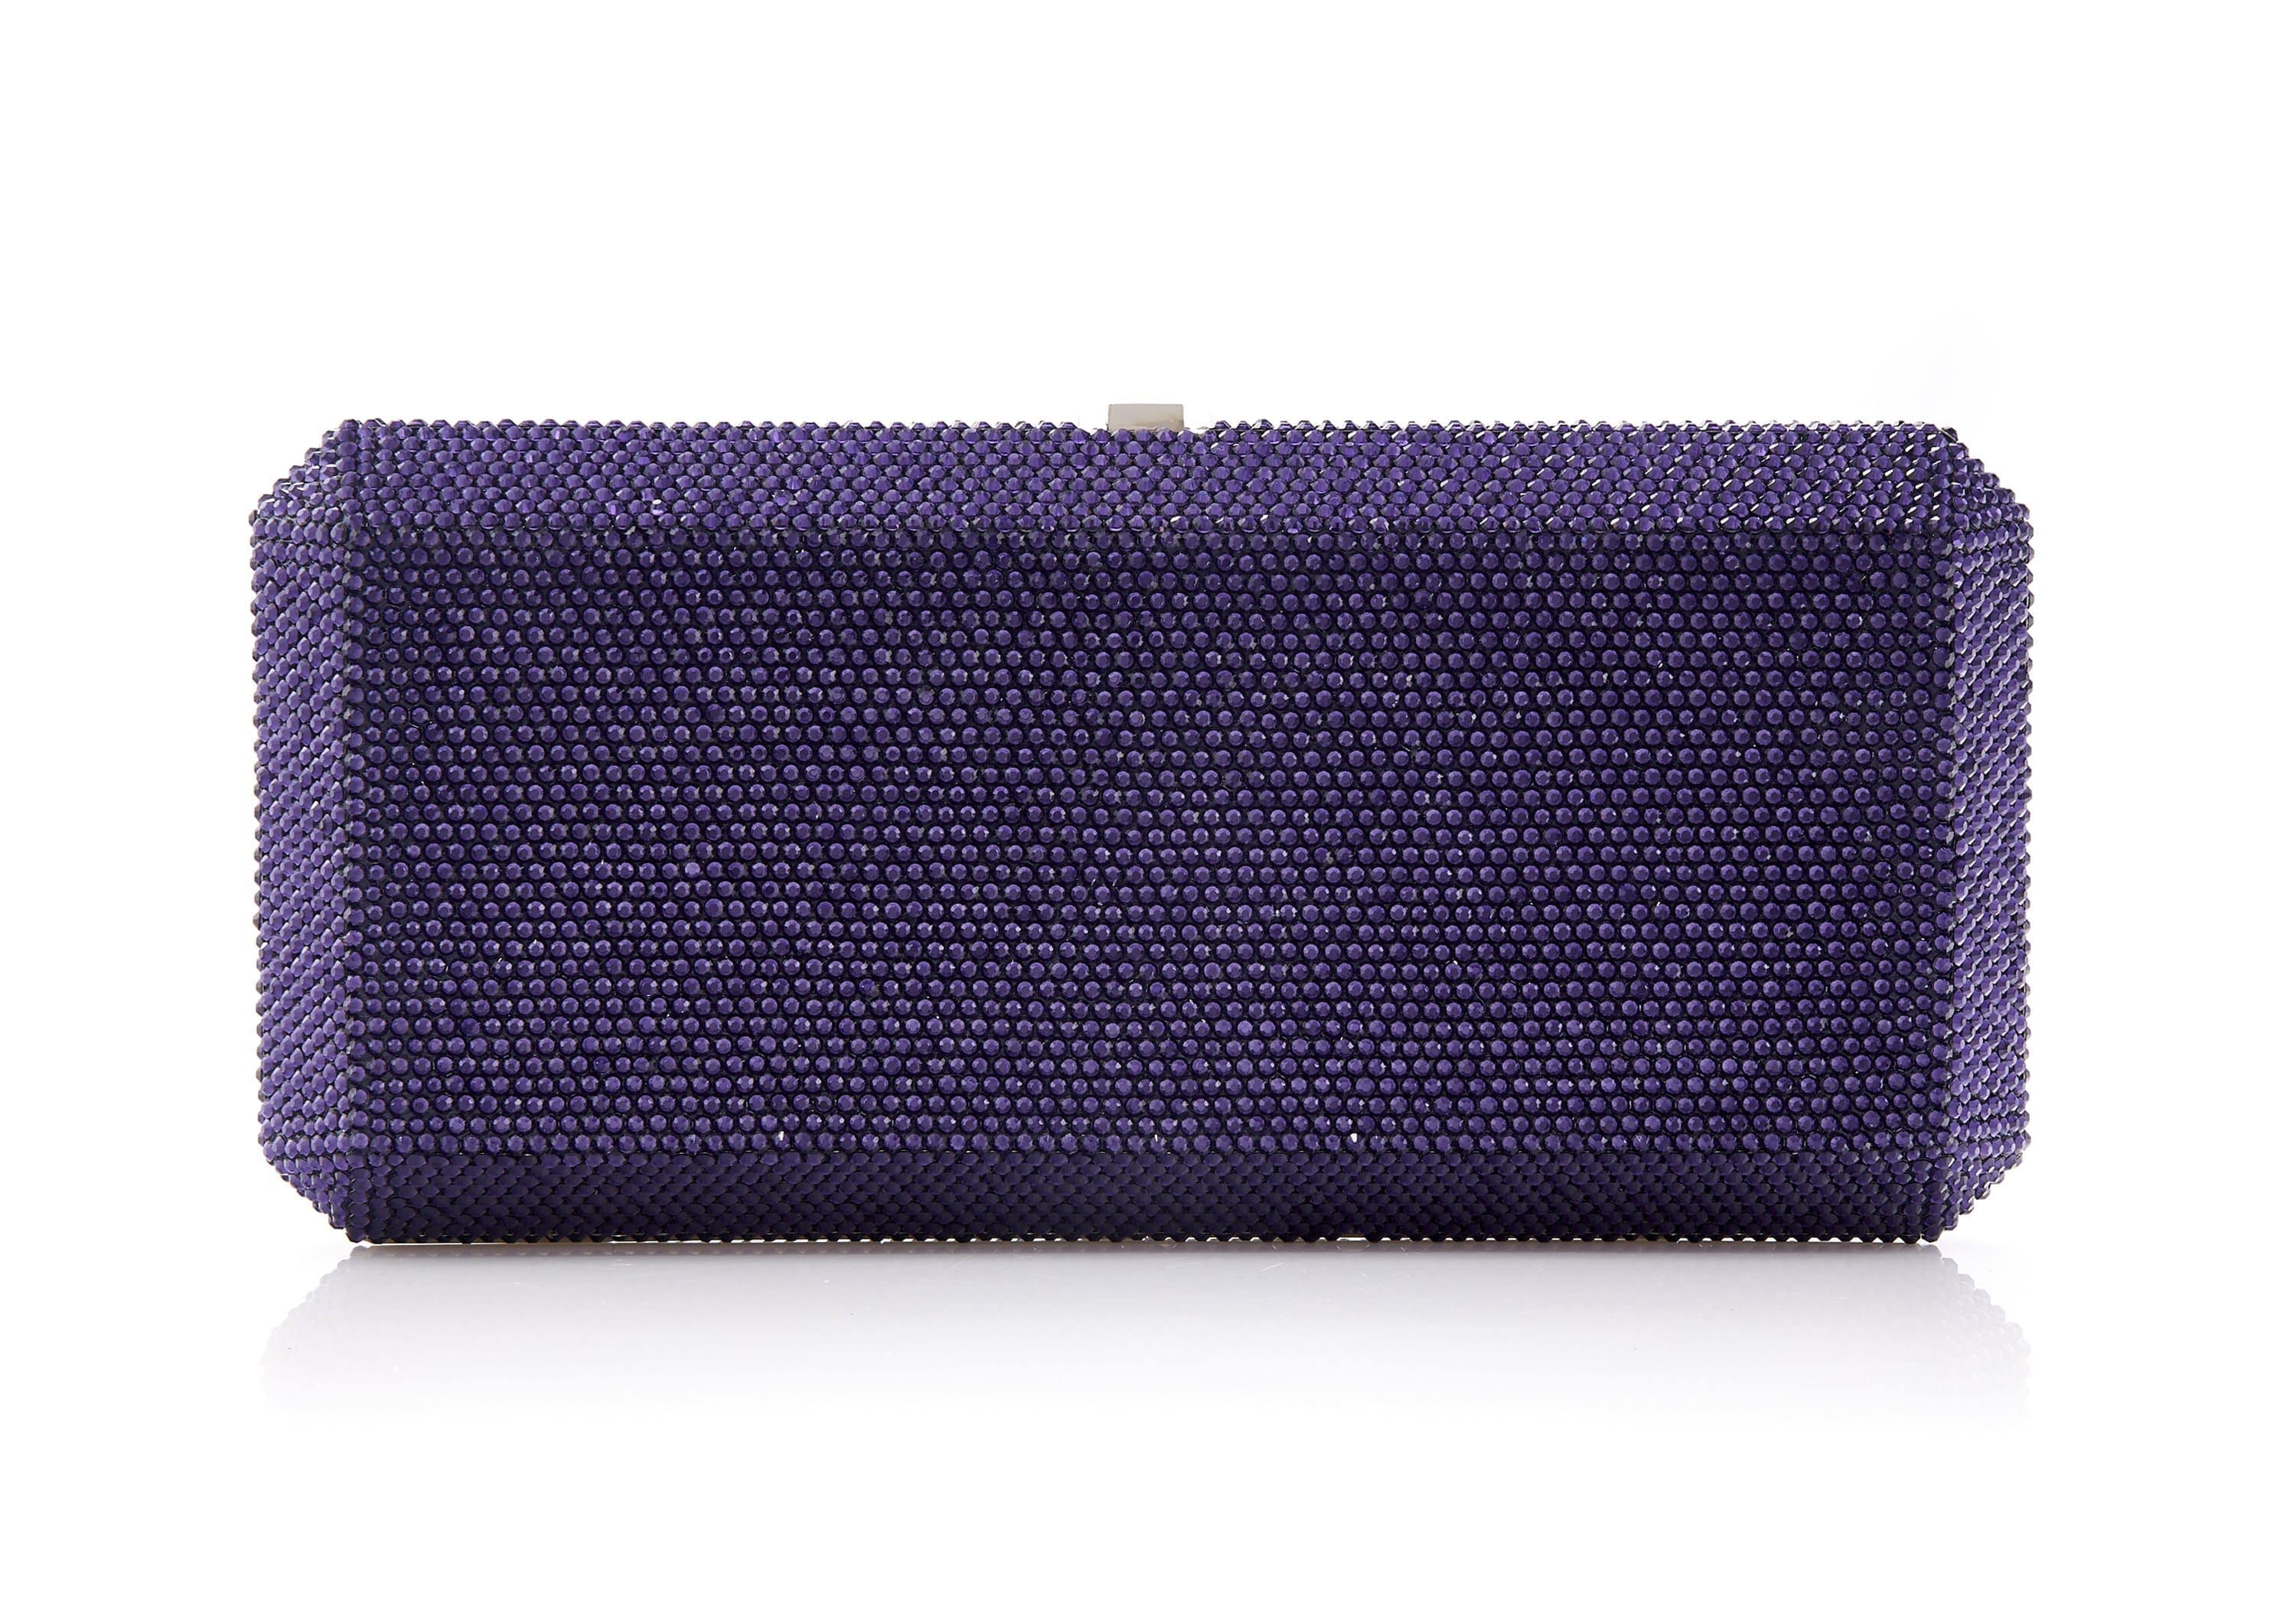 Purple Ruched Satin Clutch Bag with Diamante